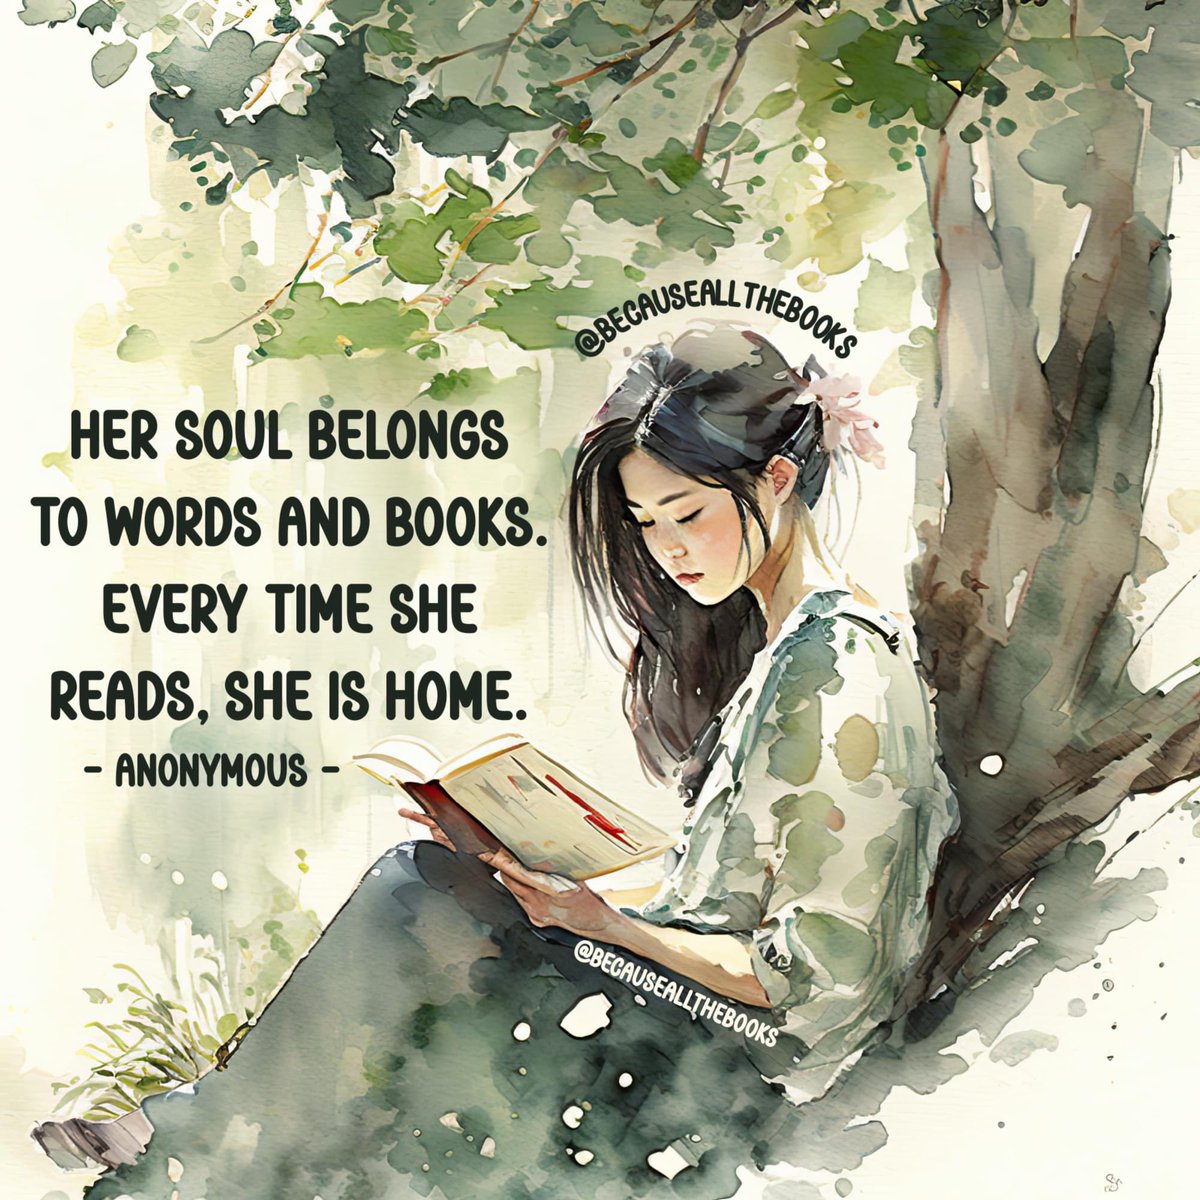 So beautiful and true! #homeisabook #readtofindpeace #magicofreading #booklove #becauseallthebooks